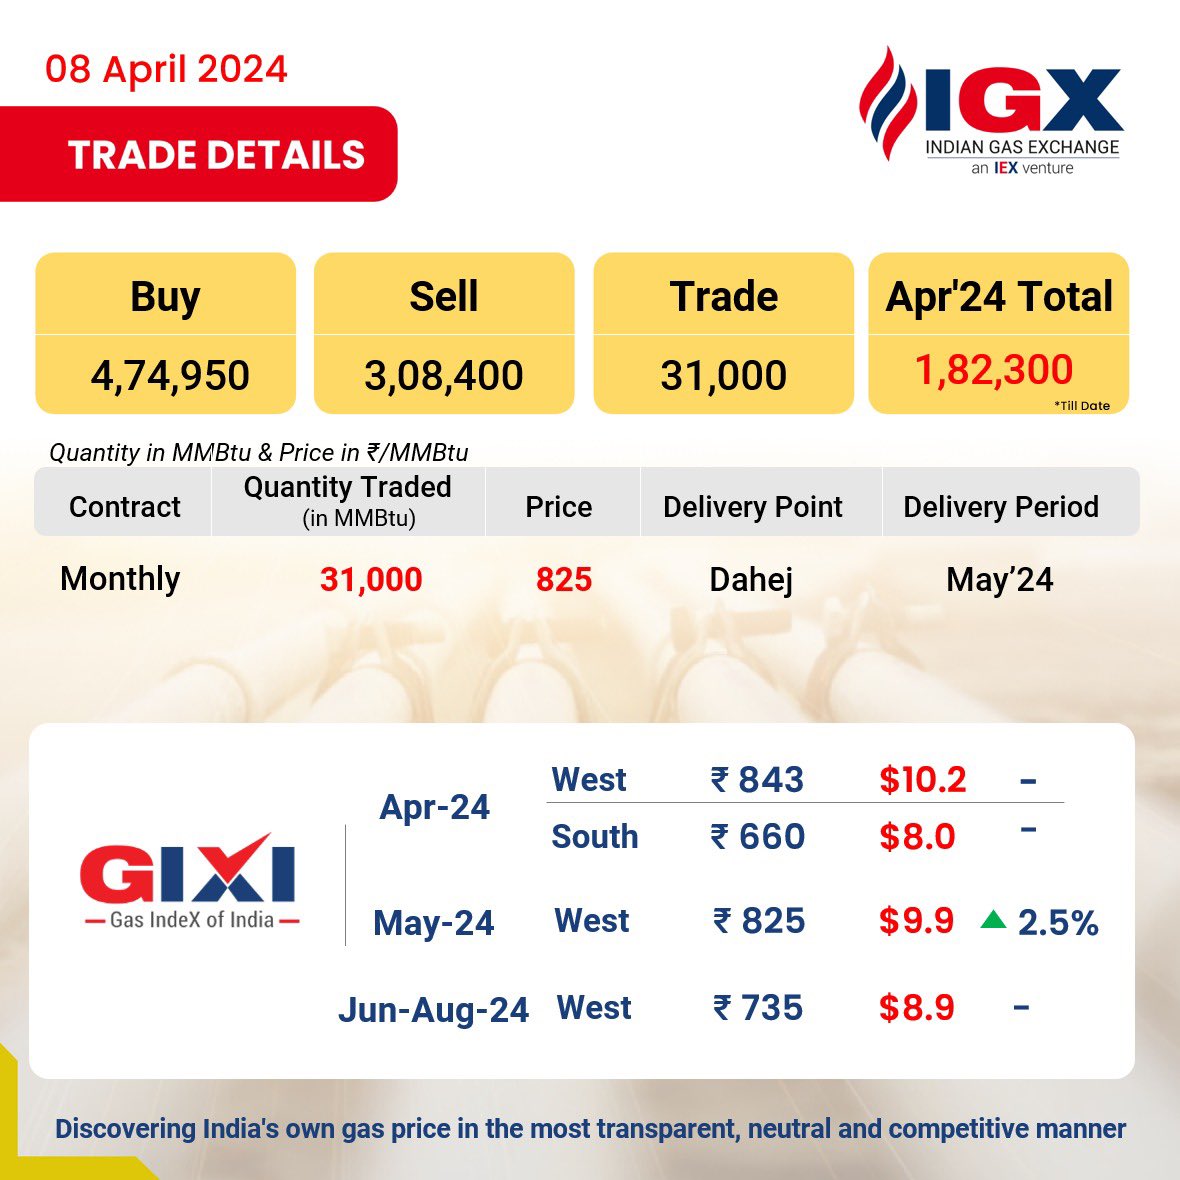 IGX trades 31,000 MMBTu quantity at Dahej delivery point, with delivery scheduled for May 2024
#IGXIndia #GasMarkets #LNG #IGX